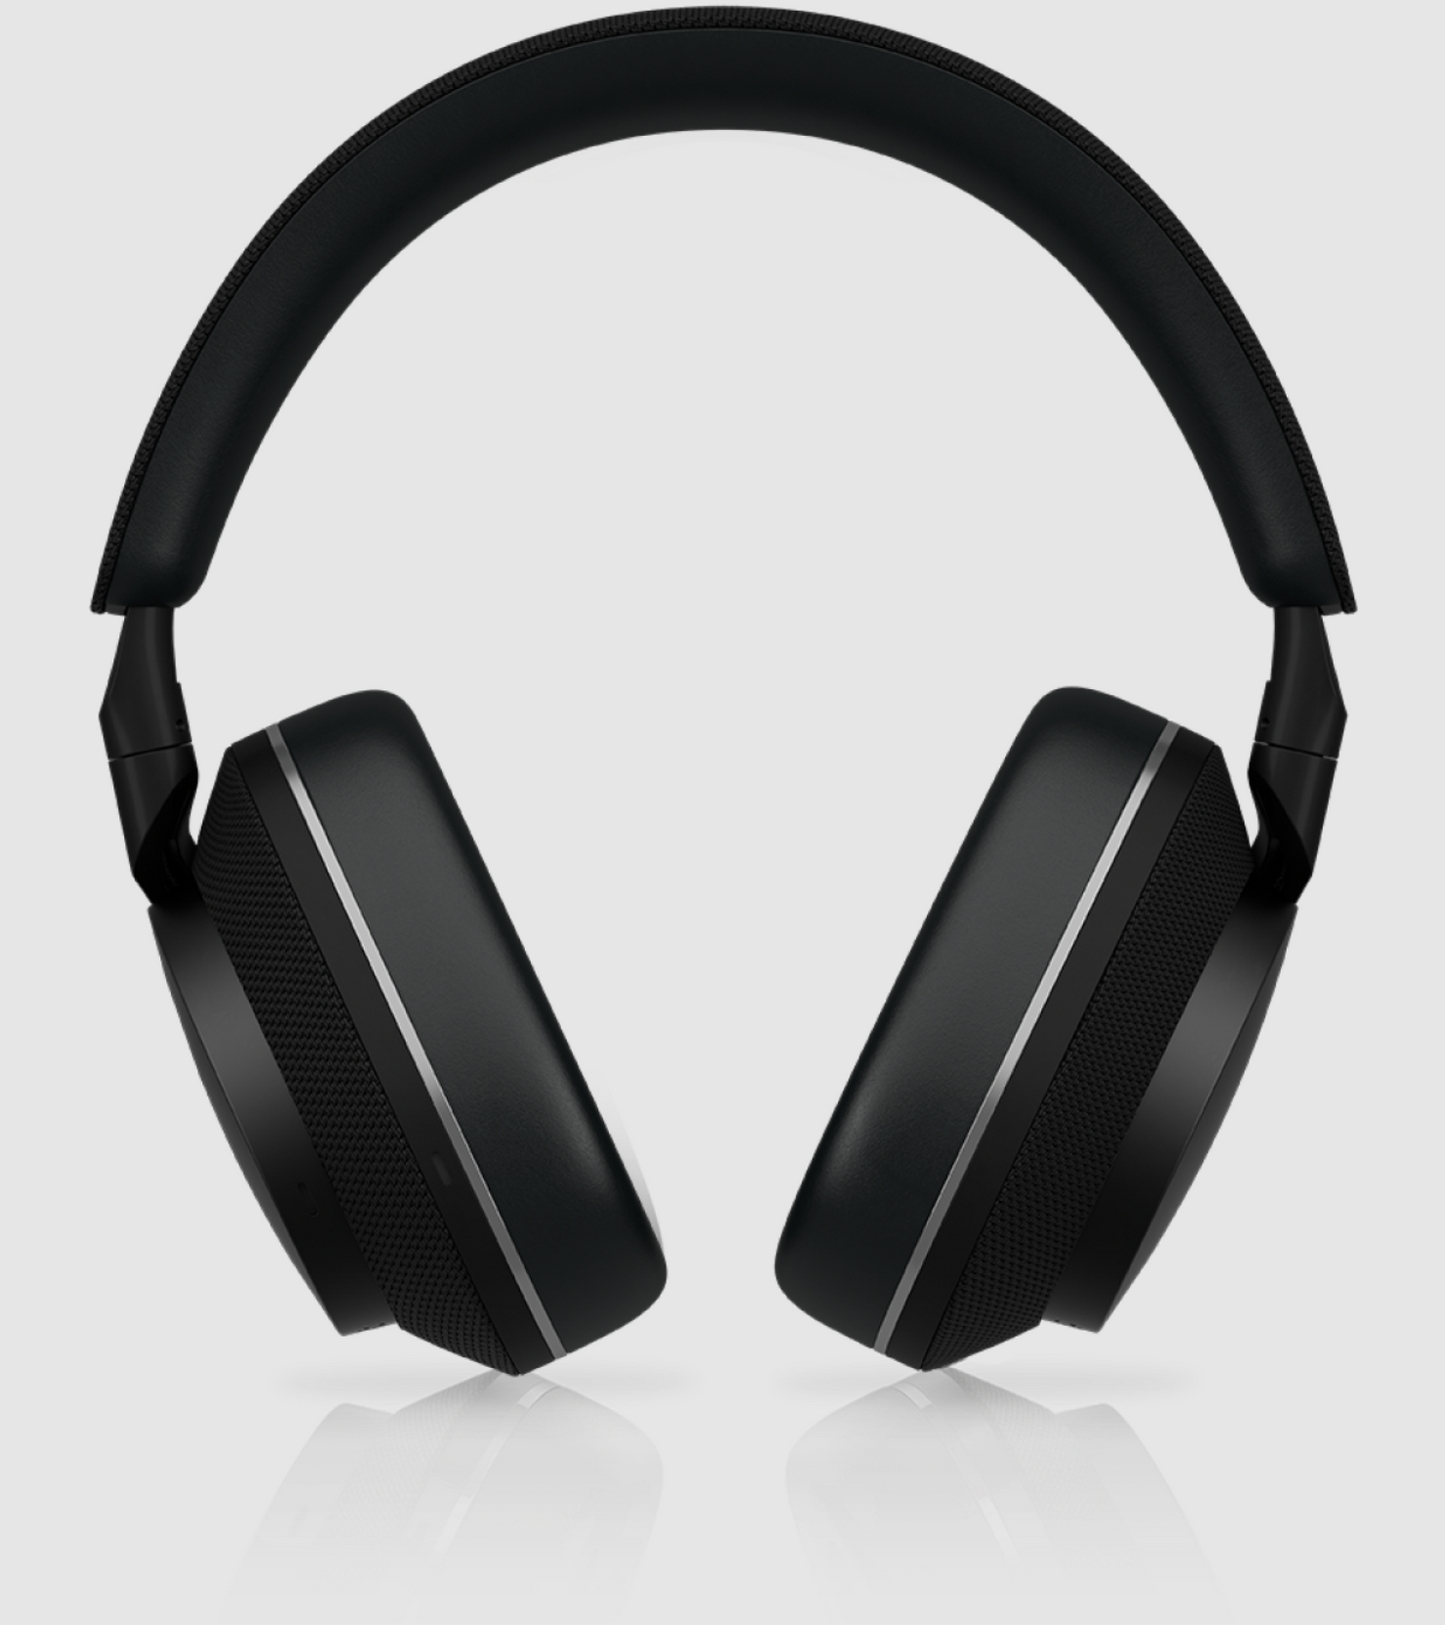 B&W Px7 S2e Noise Cancelling Headphones in Anthracite Black.  Image shows front